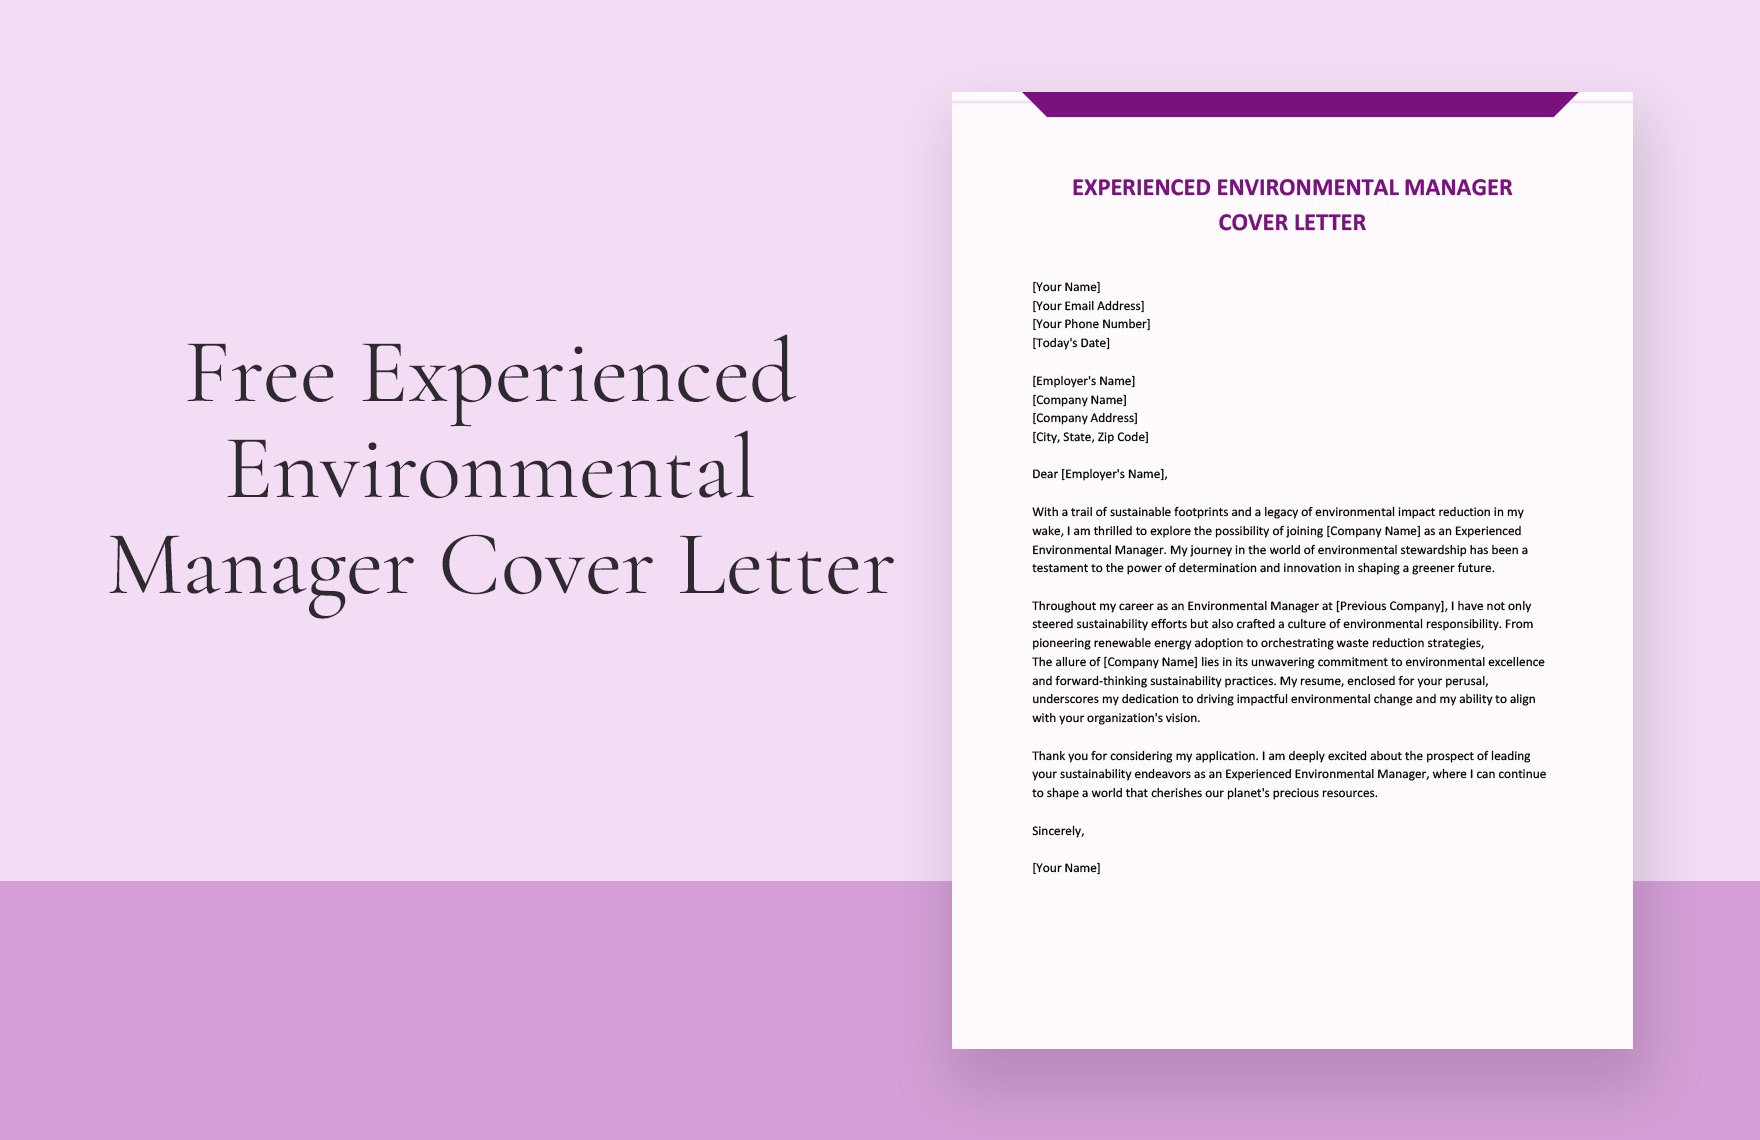 Experienced Environmental Manager Cover Letter